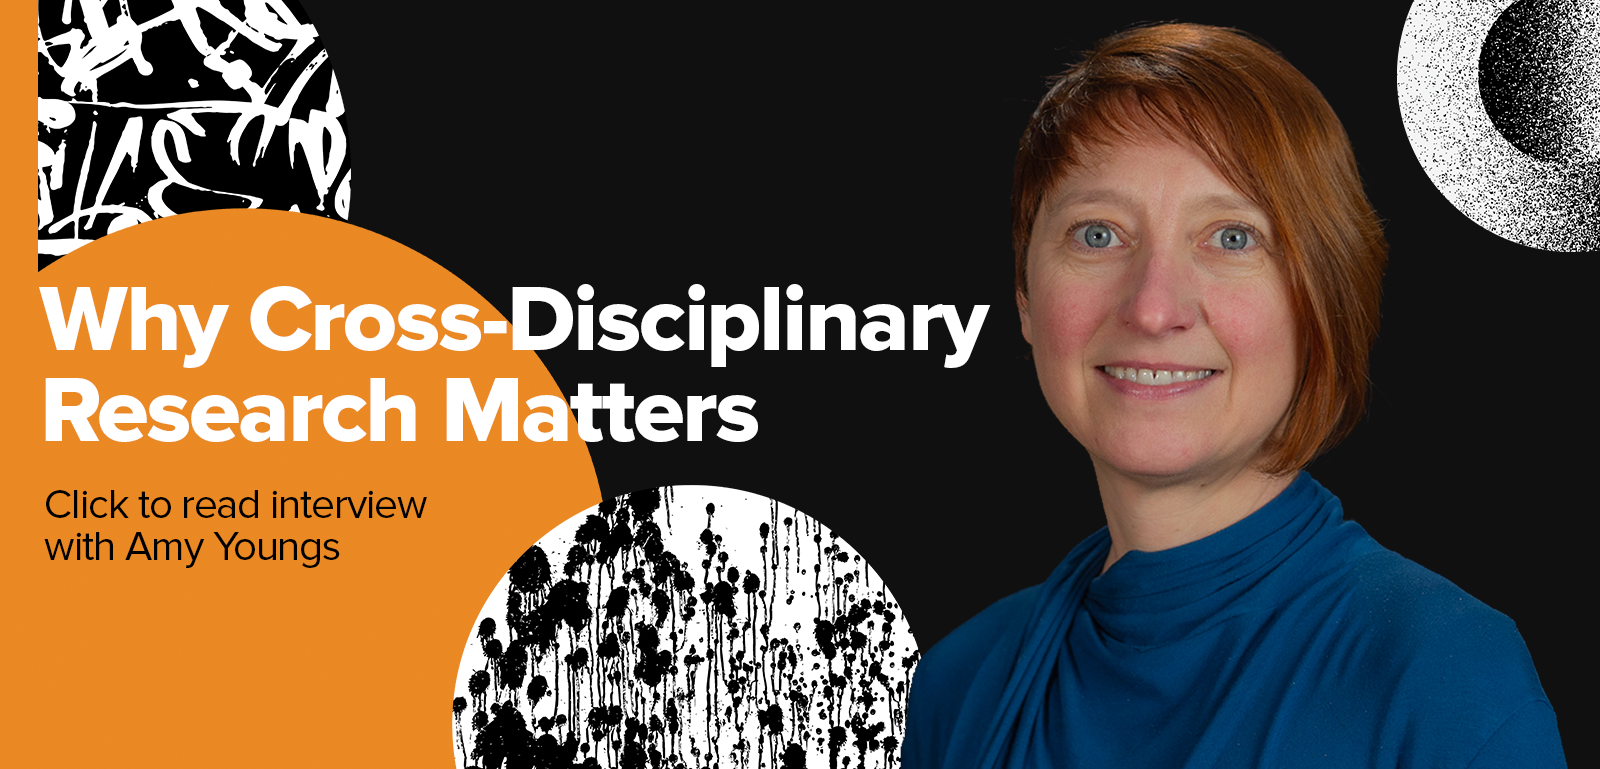 Text on image reads: Why Cross-Disciplinary Research Matters: Click to read interview with Amy Youngs"